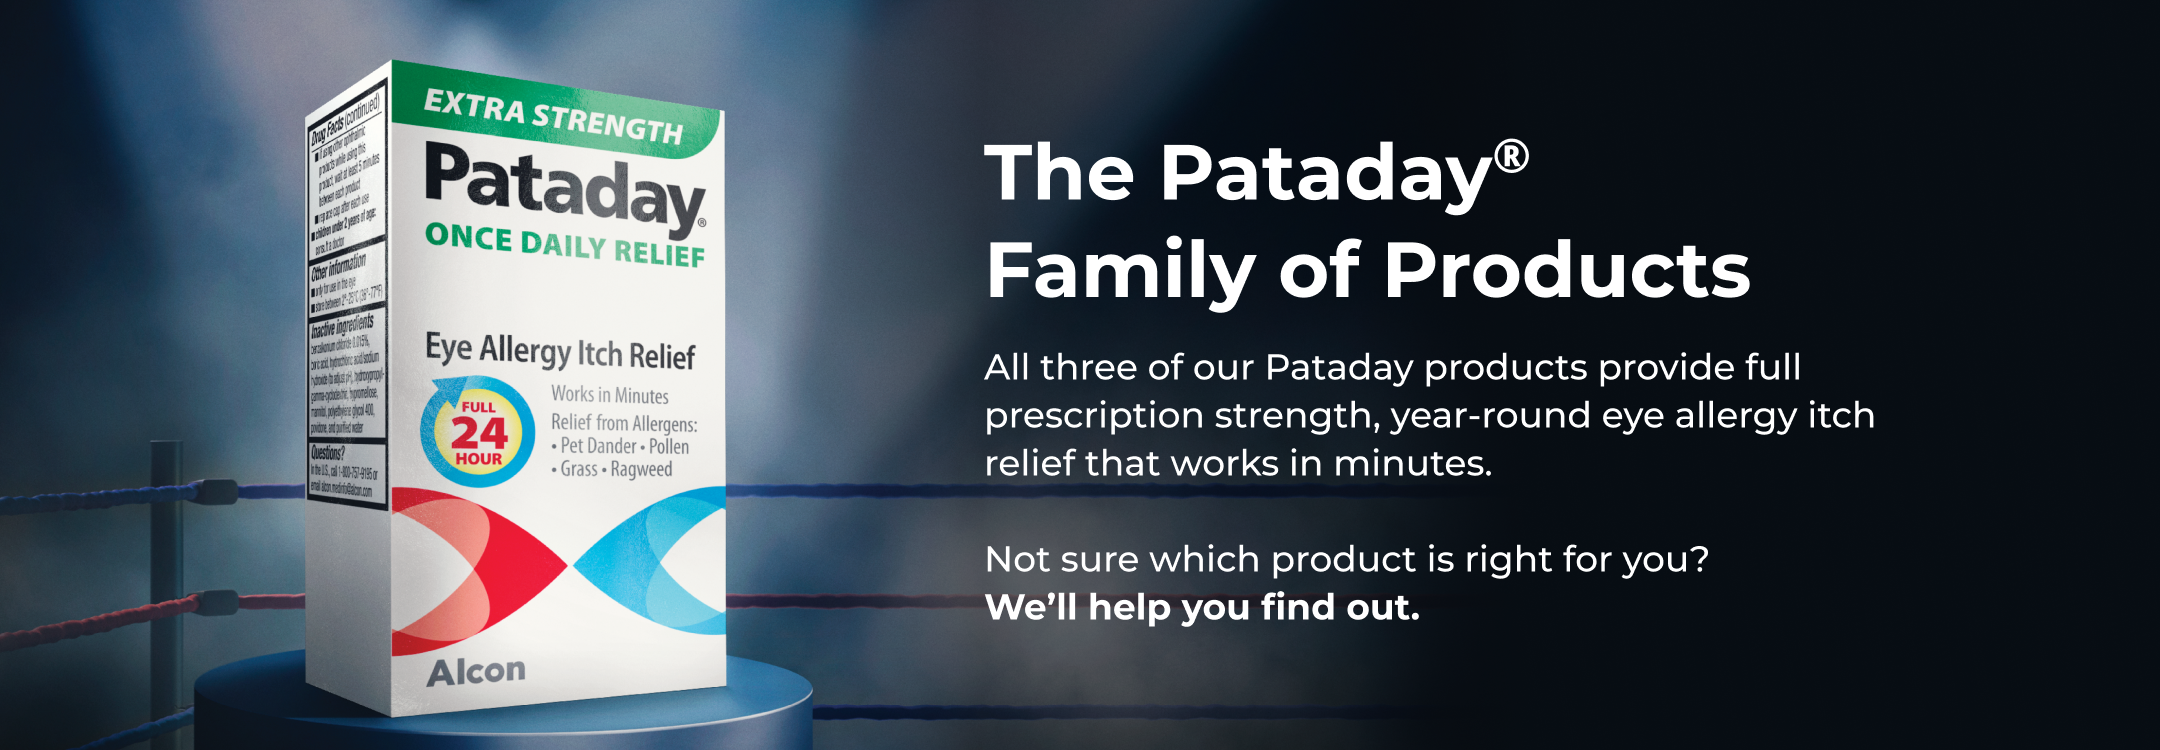 Extra Strength Pataday product box sitting on top of a stool in the corner of a boxing ring with blue and red ropes in the background